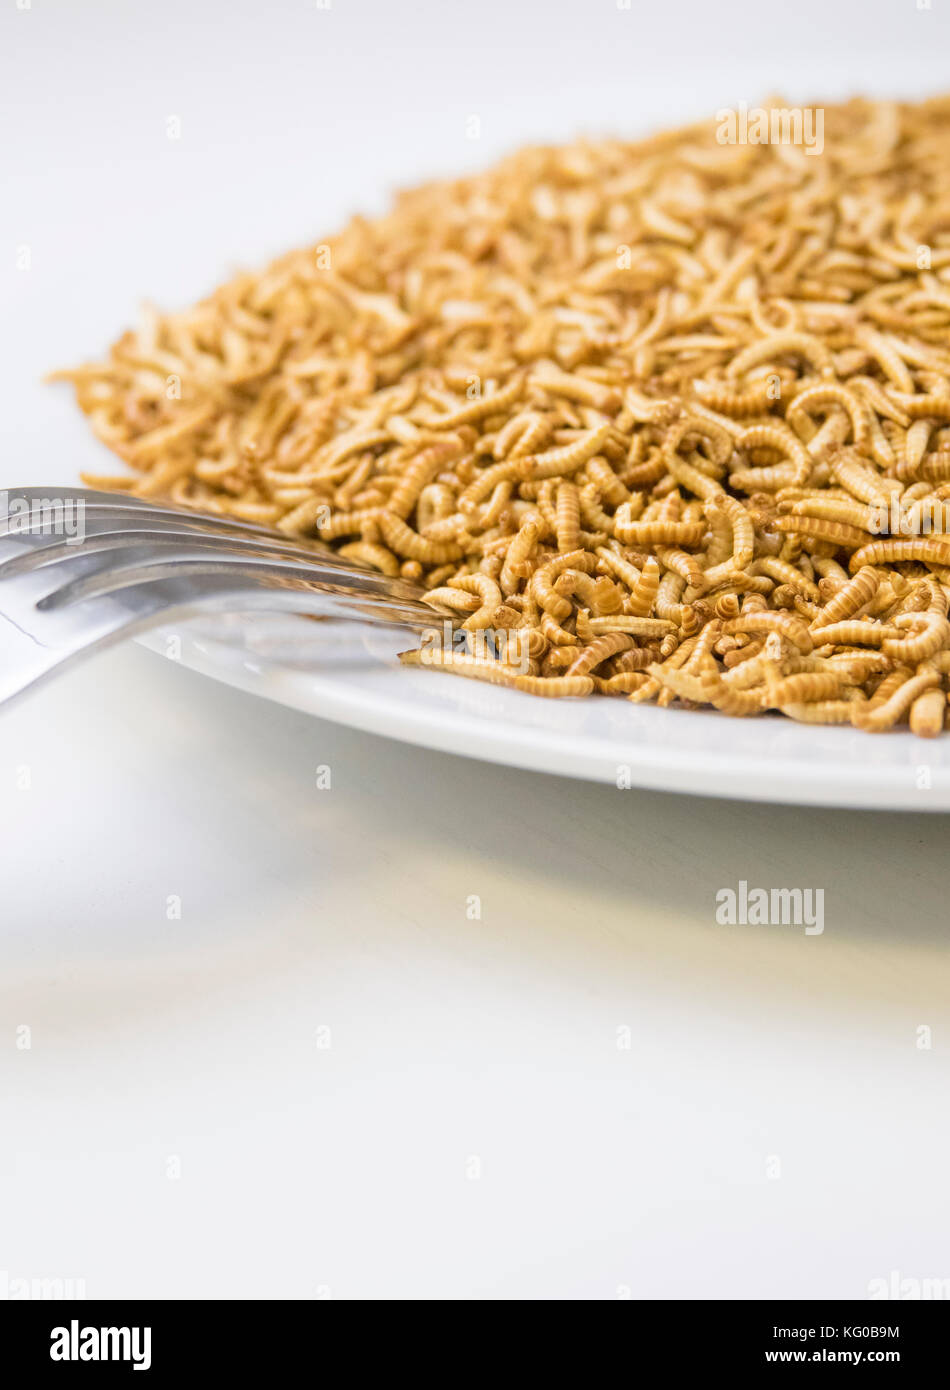 Buffalo Worms on plate in kitchen. Edible insects as food product filled with protein and nutrition. Stock Photo